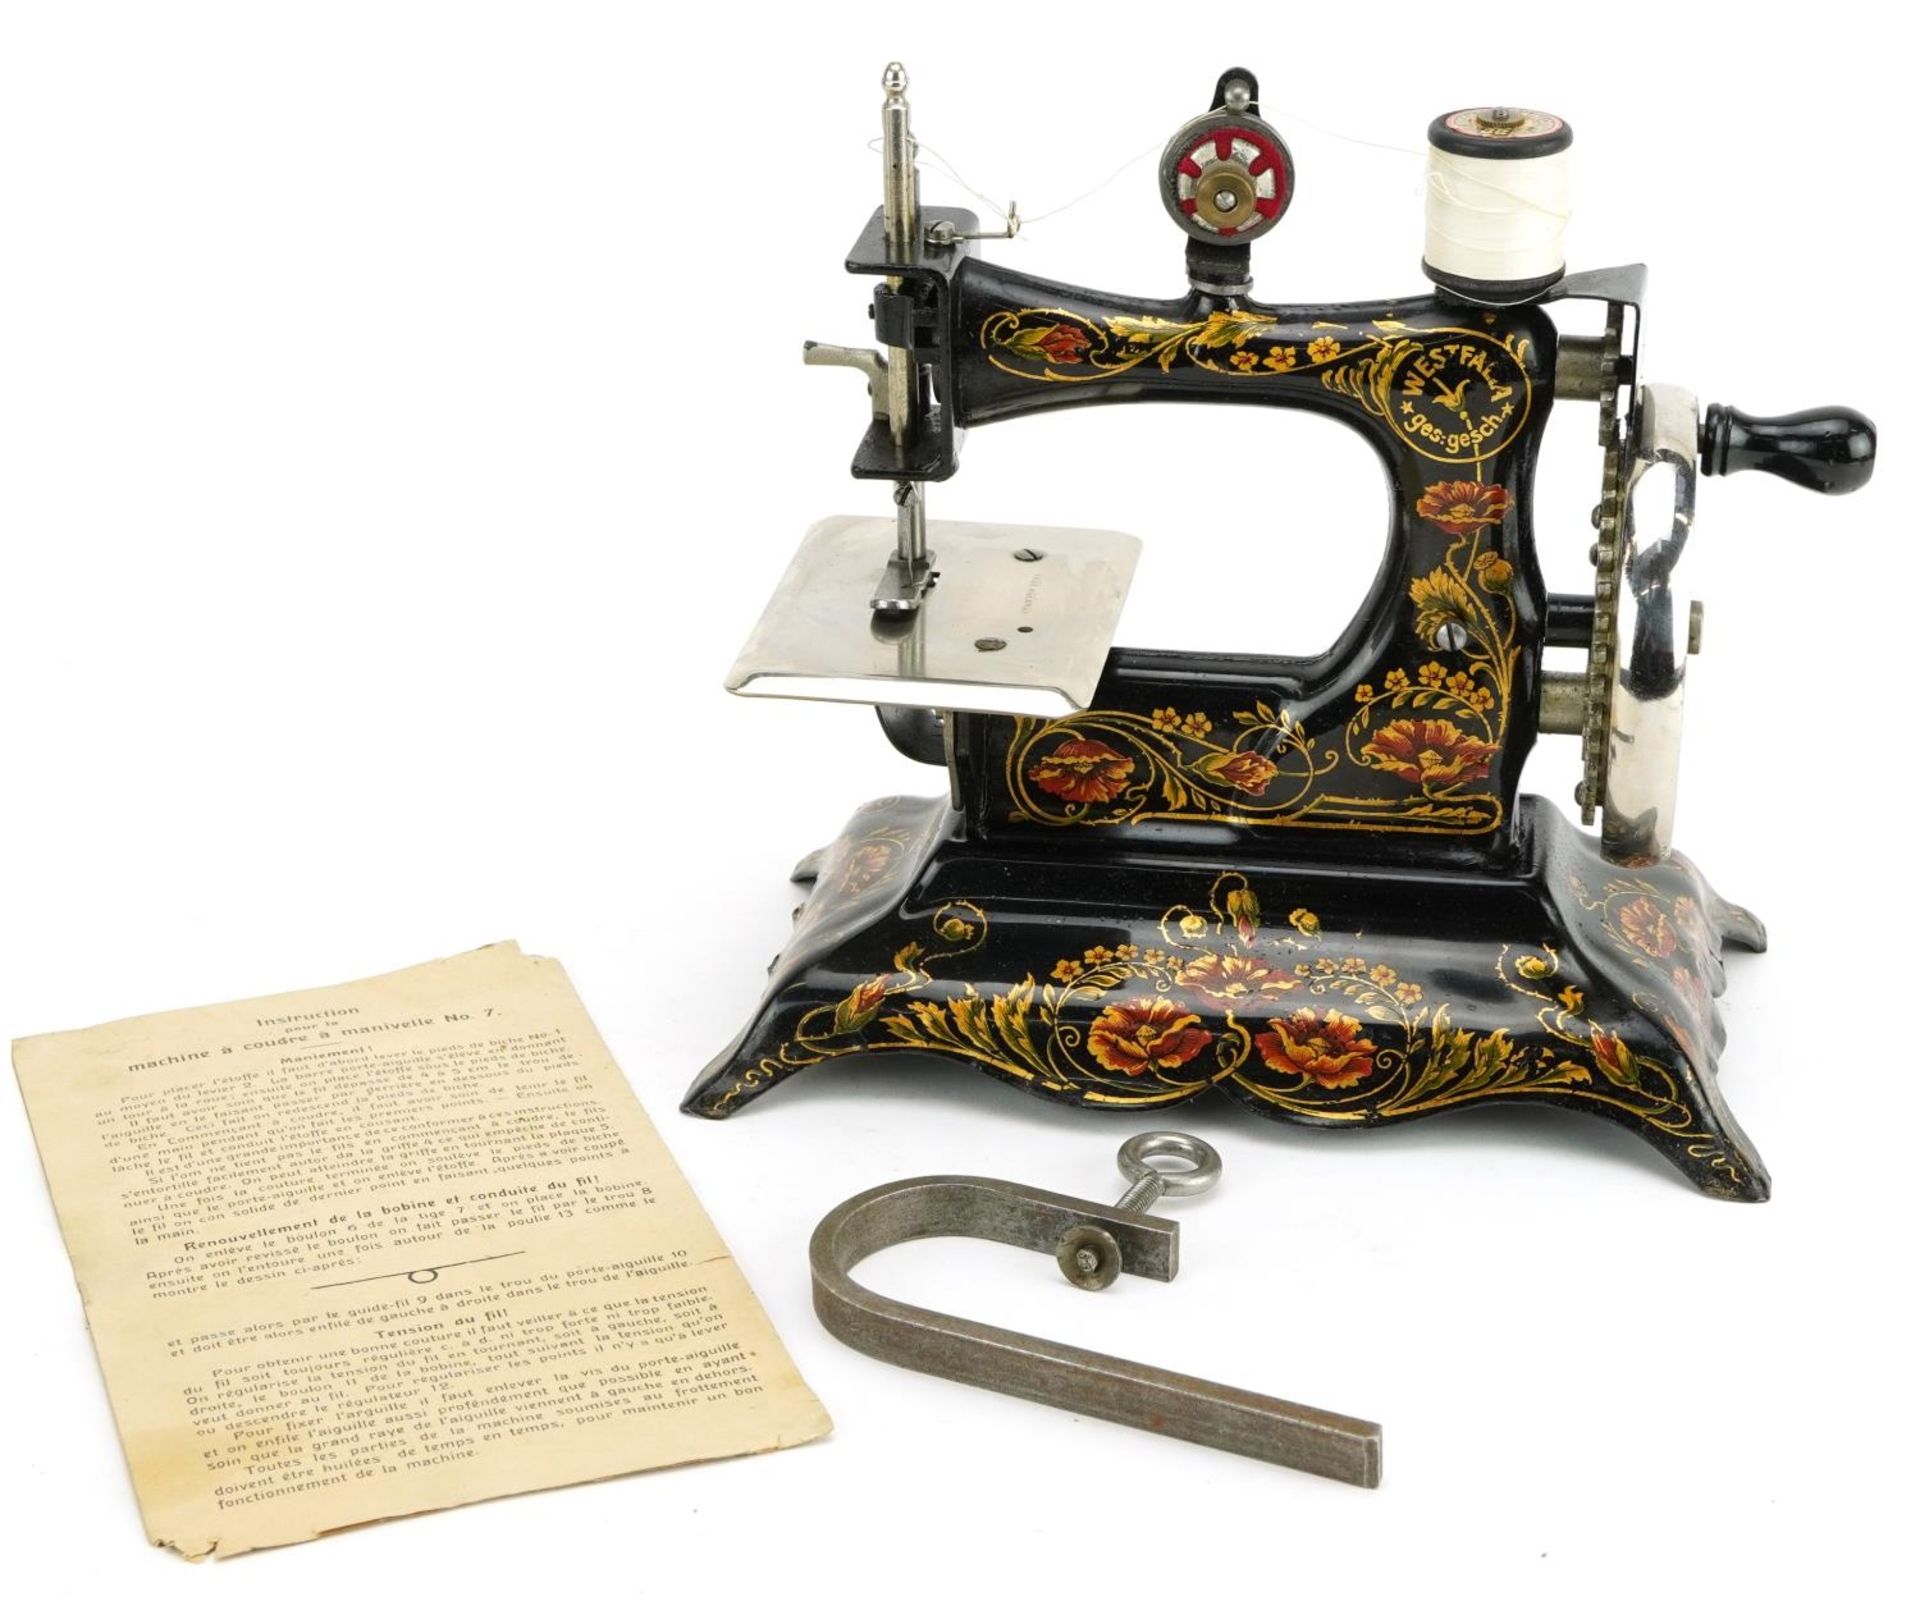 19th century German Westfalia hand operated child's sewing machine, no 7 with box and - Image 3 of 7